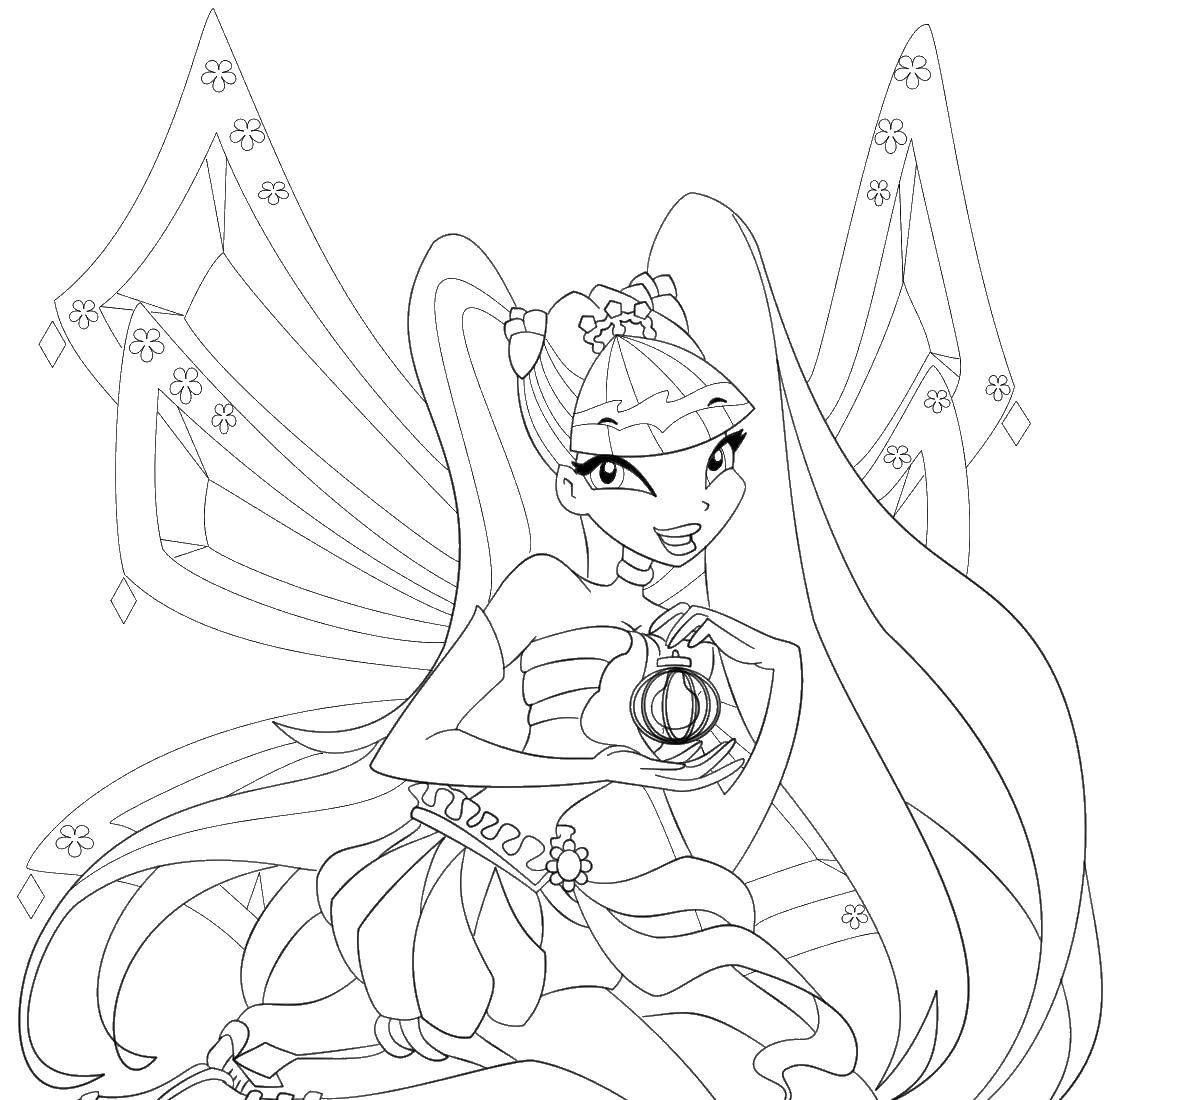 Coloring Stella. Category Winx club. Tags:  fairy, Stella, wings.